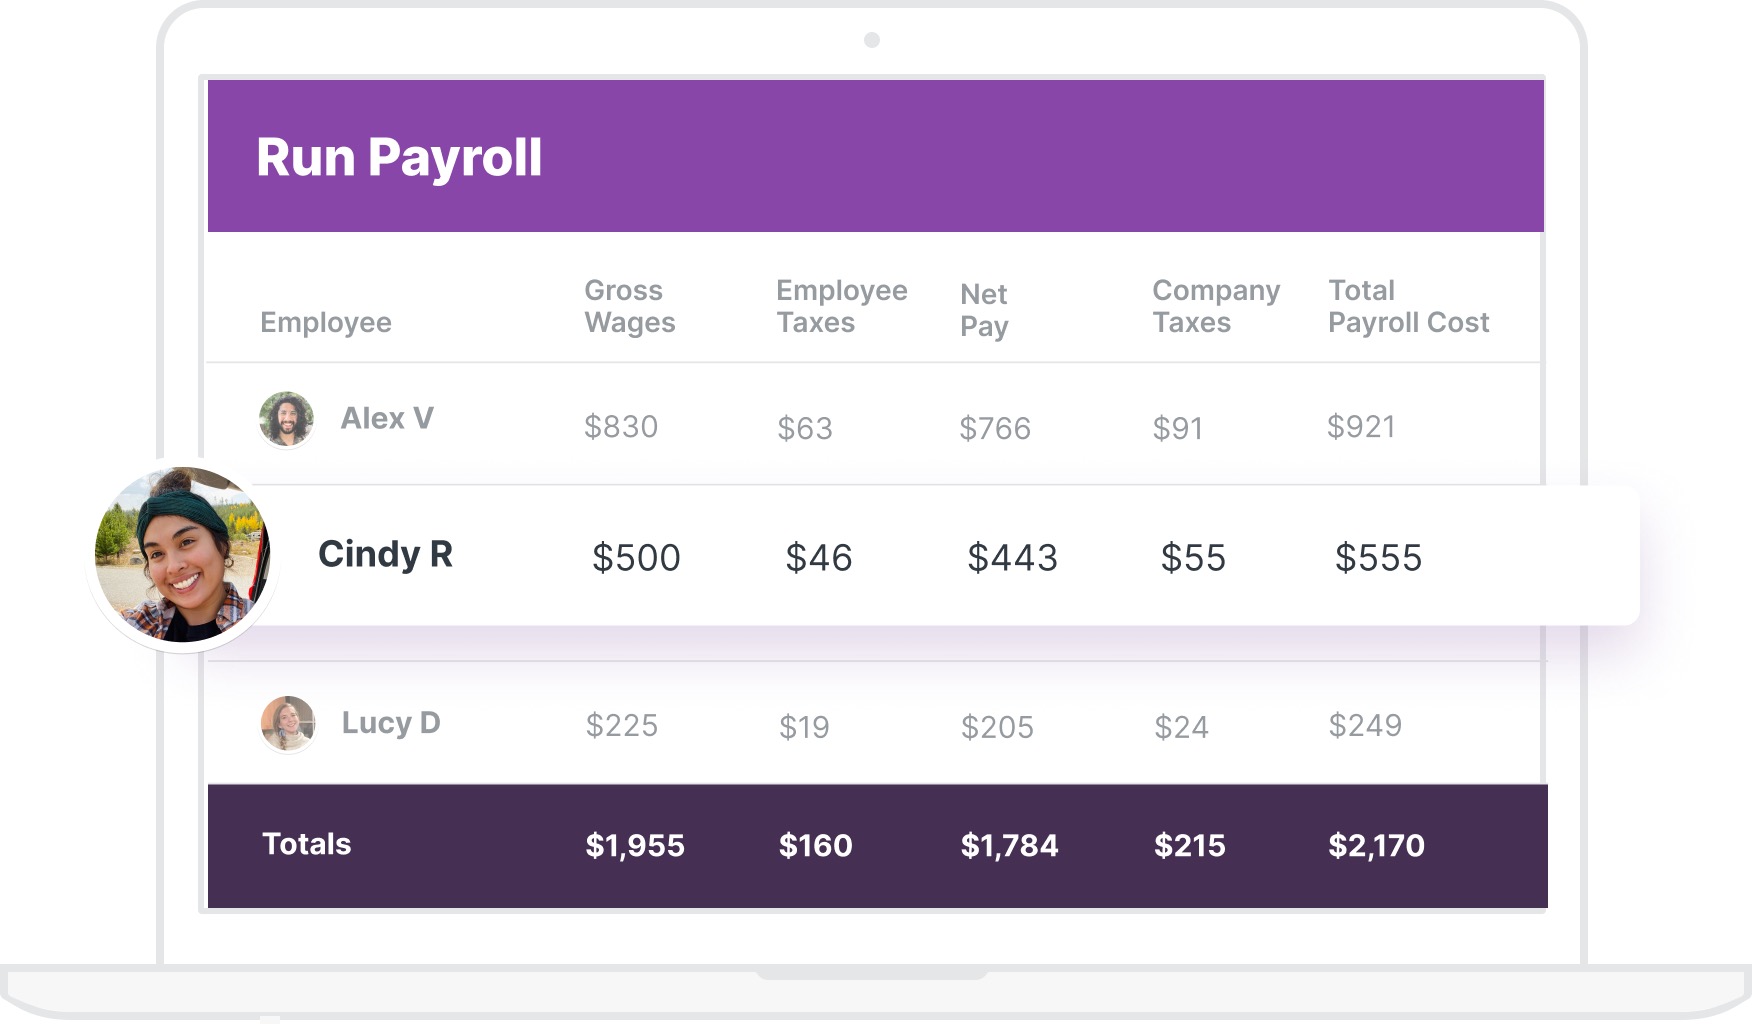 An image of the Homebase Payroll UI, which shows the employee name, gross wages, taxes, net pay, company taxes, and total payroll cost.